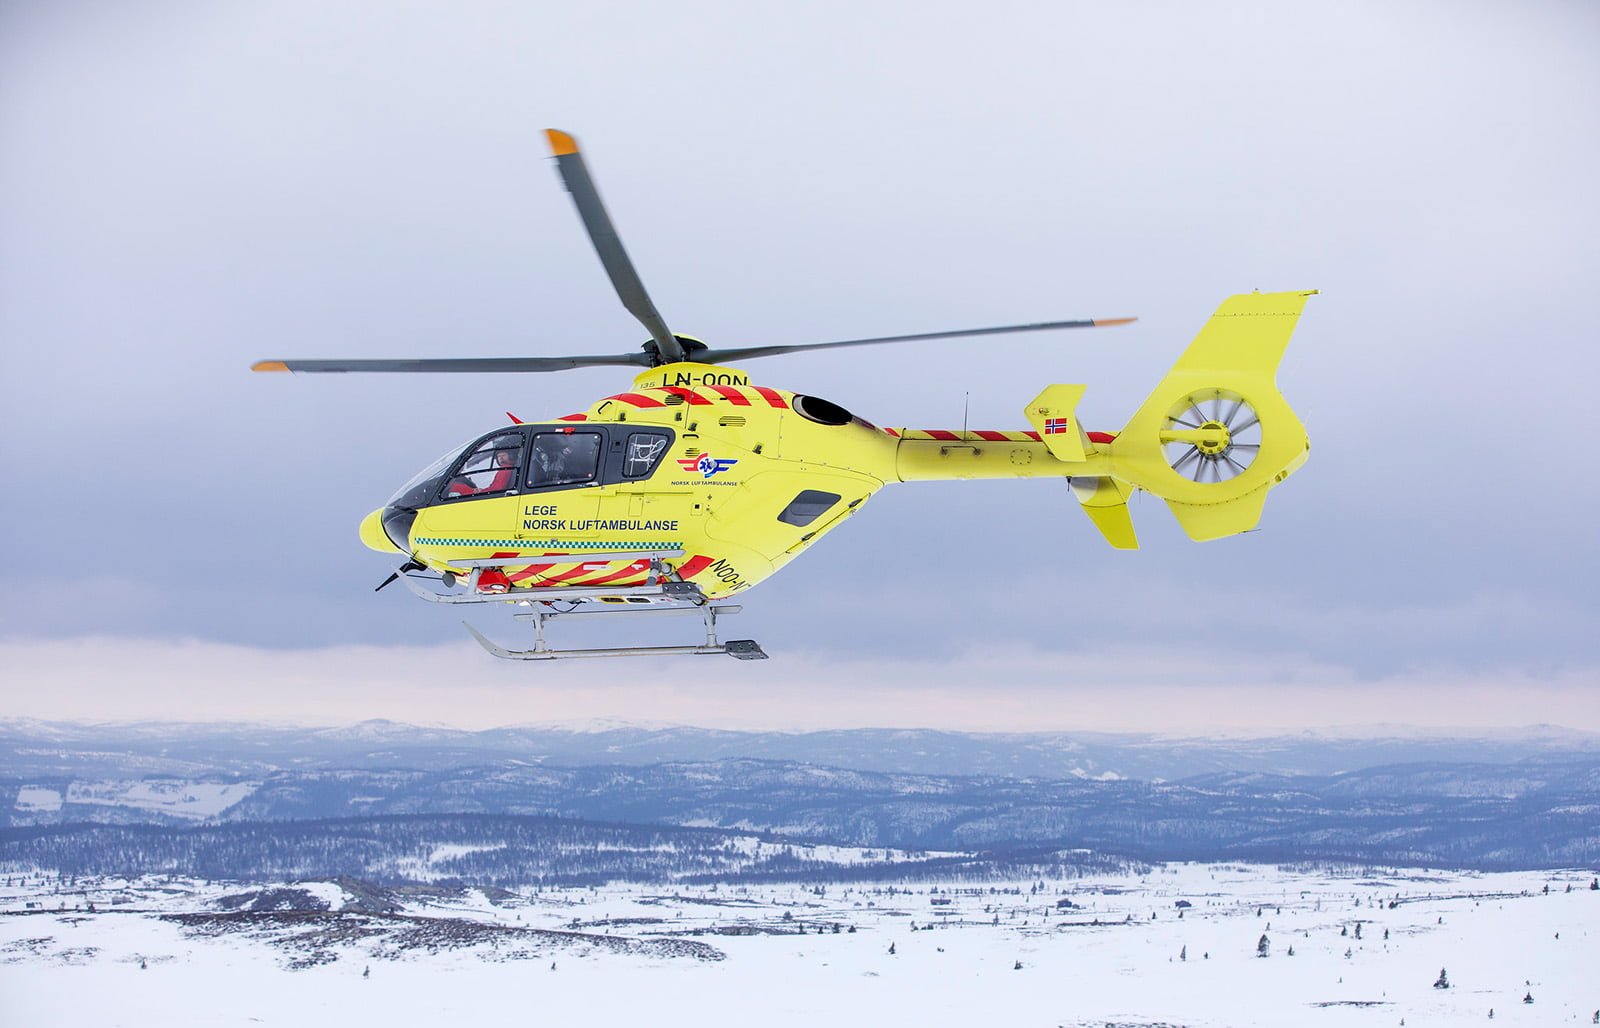 A Norwegian Air Ambulance helicopter in Norway.